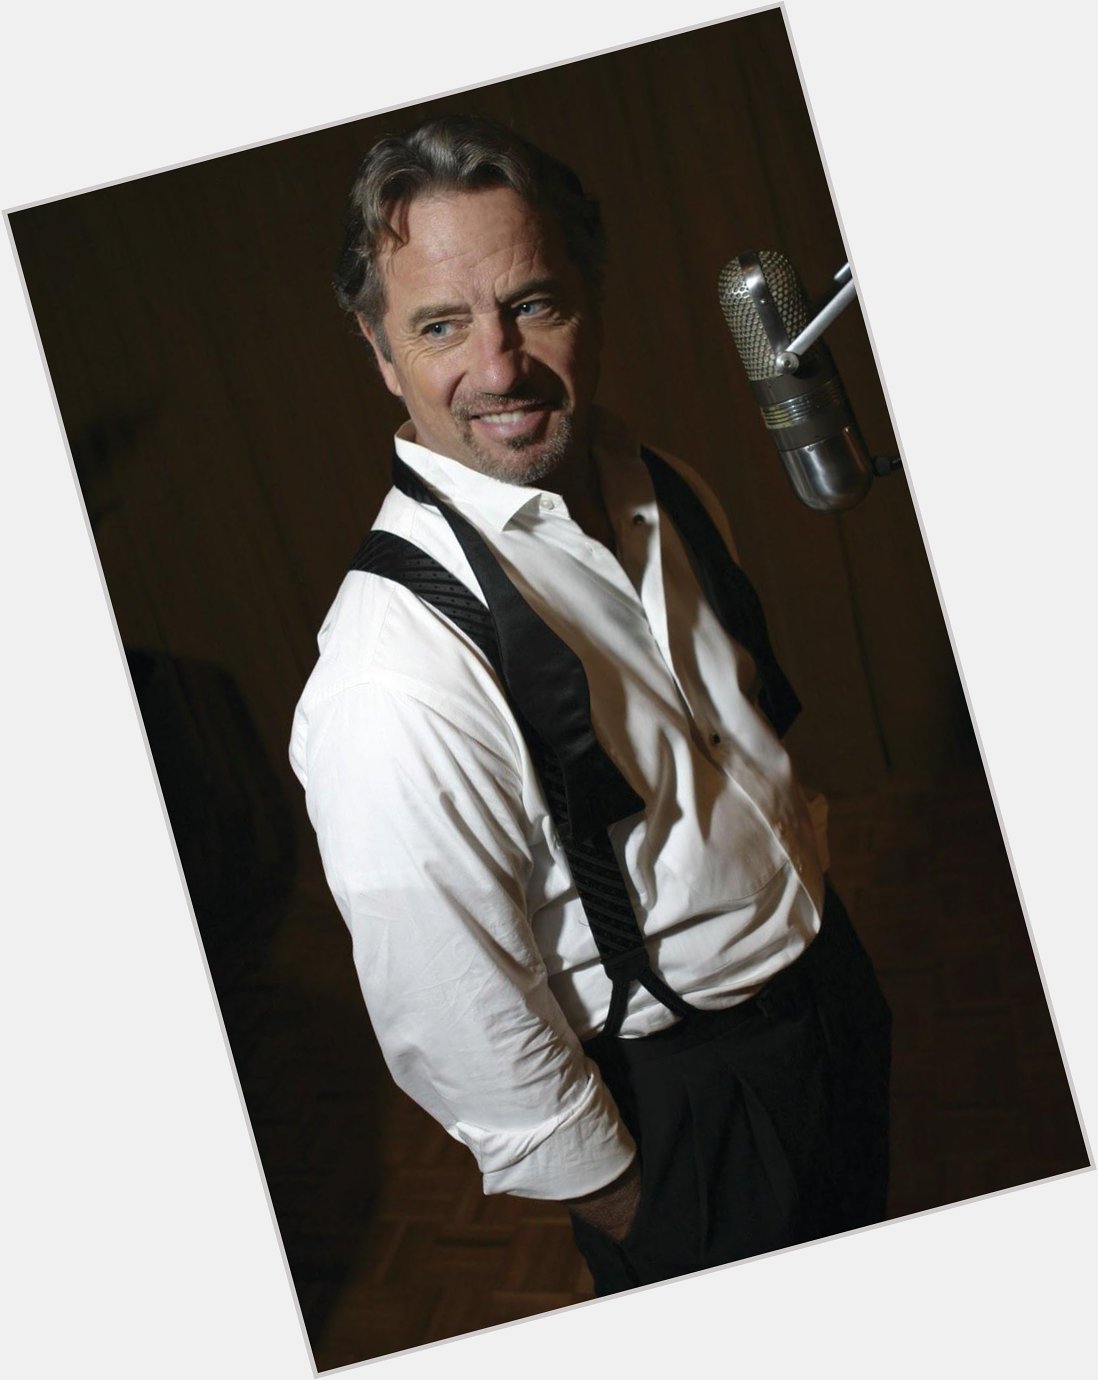 Happy Birthday to Tom Wopat who performs here on November 21!  